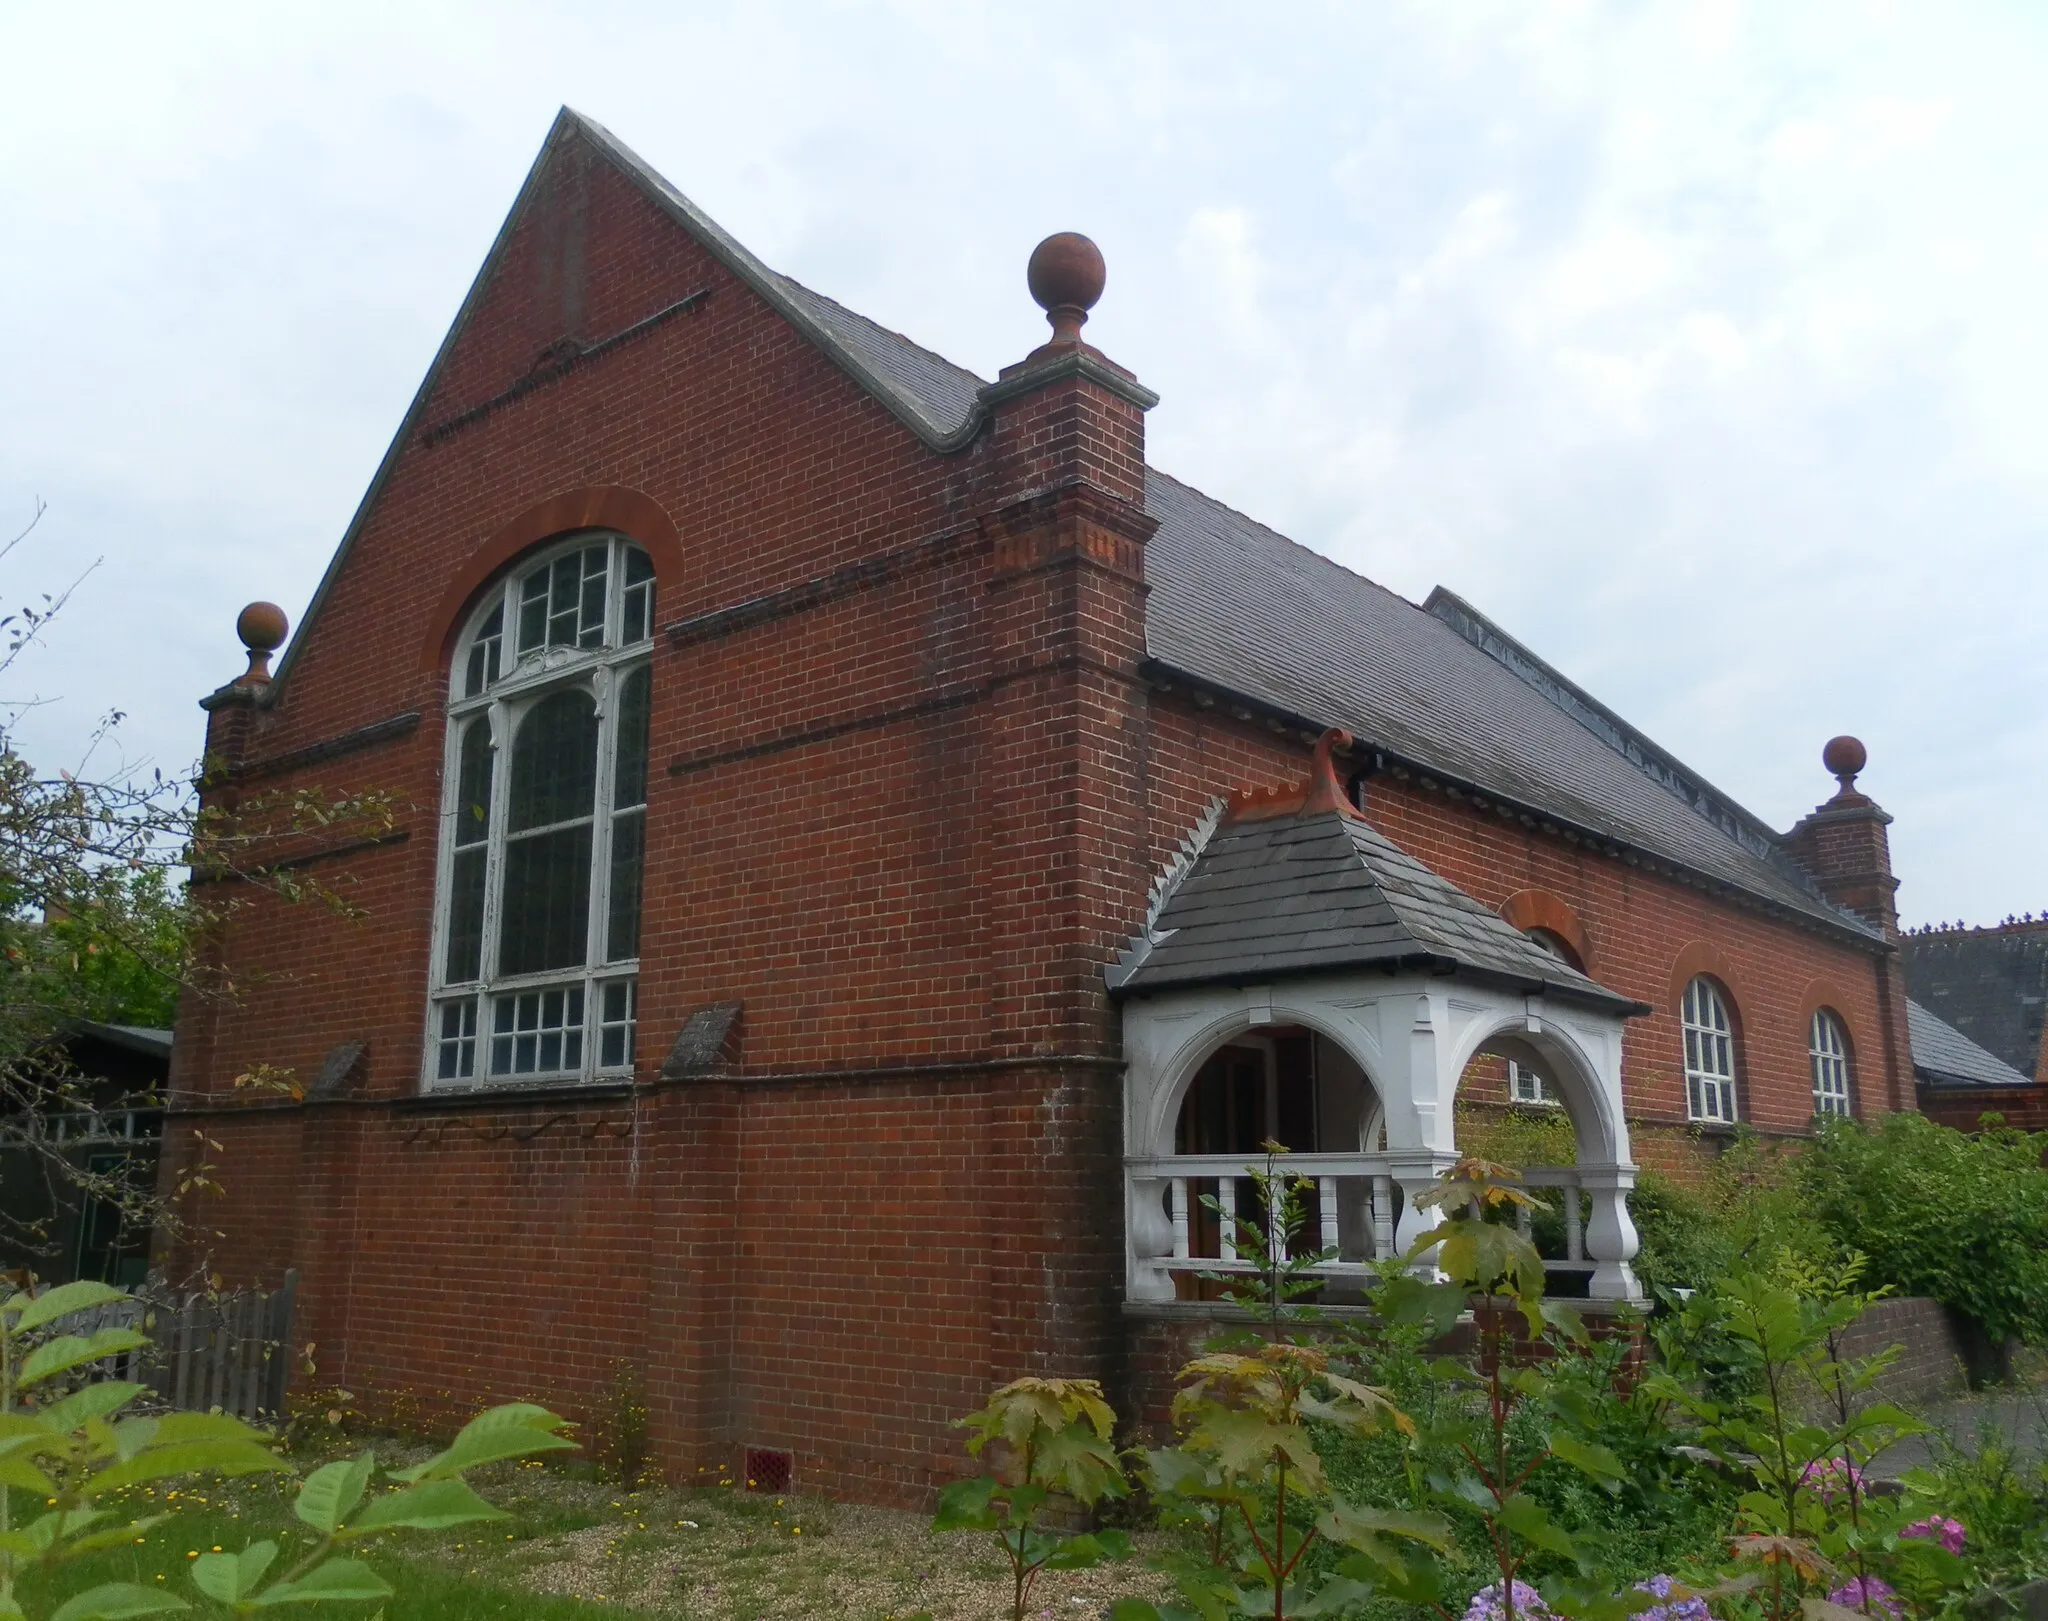 Photo showing: Pembury Baptist Church, Romford Road, Pembury, Borough of Tunbridge Wells, Kent, England.  Built as Union Chapel (Baptist and Congregational) in 1887; became Pembury Free Church in the 1920s and is now Pembury Baptist Church.